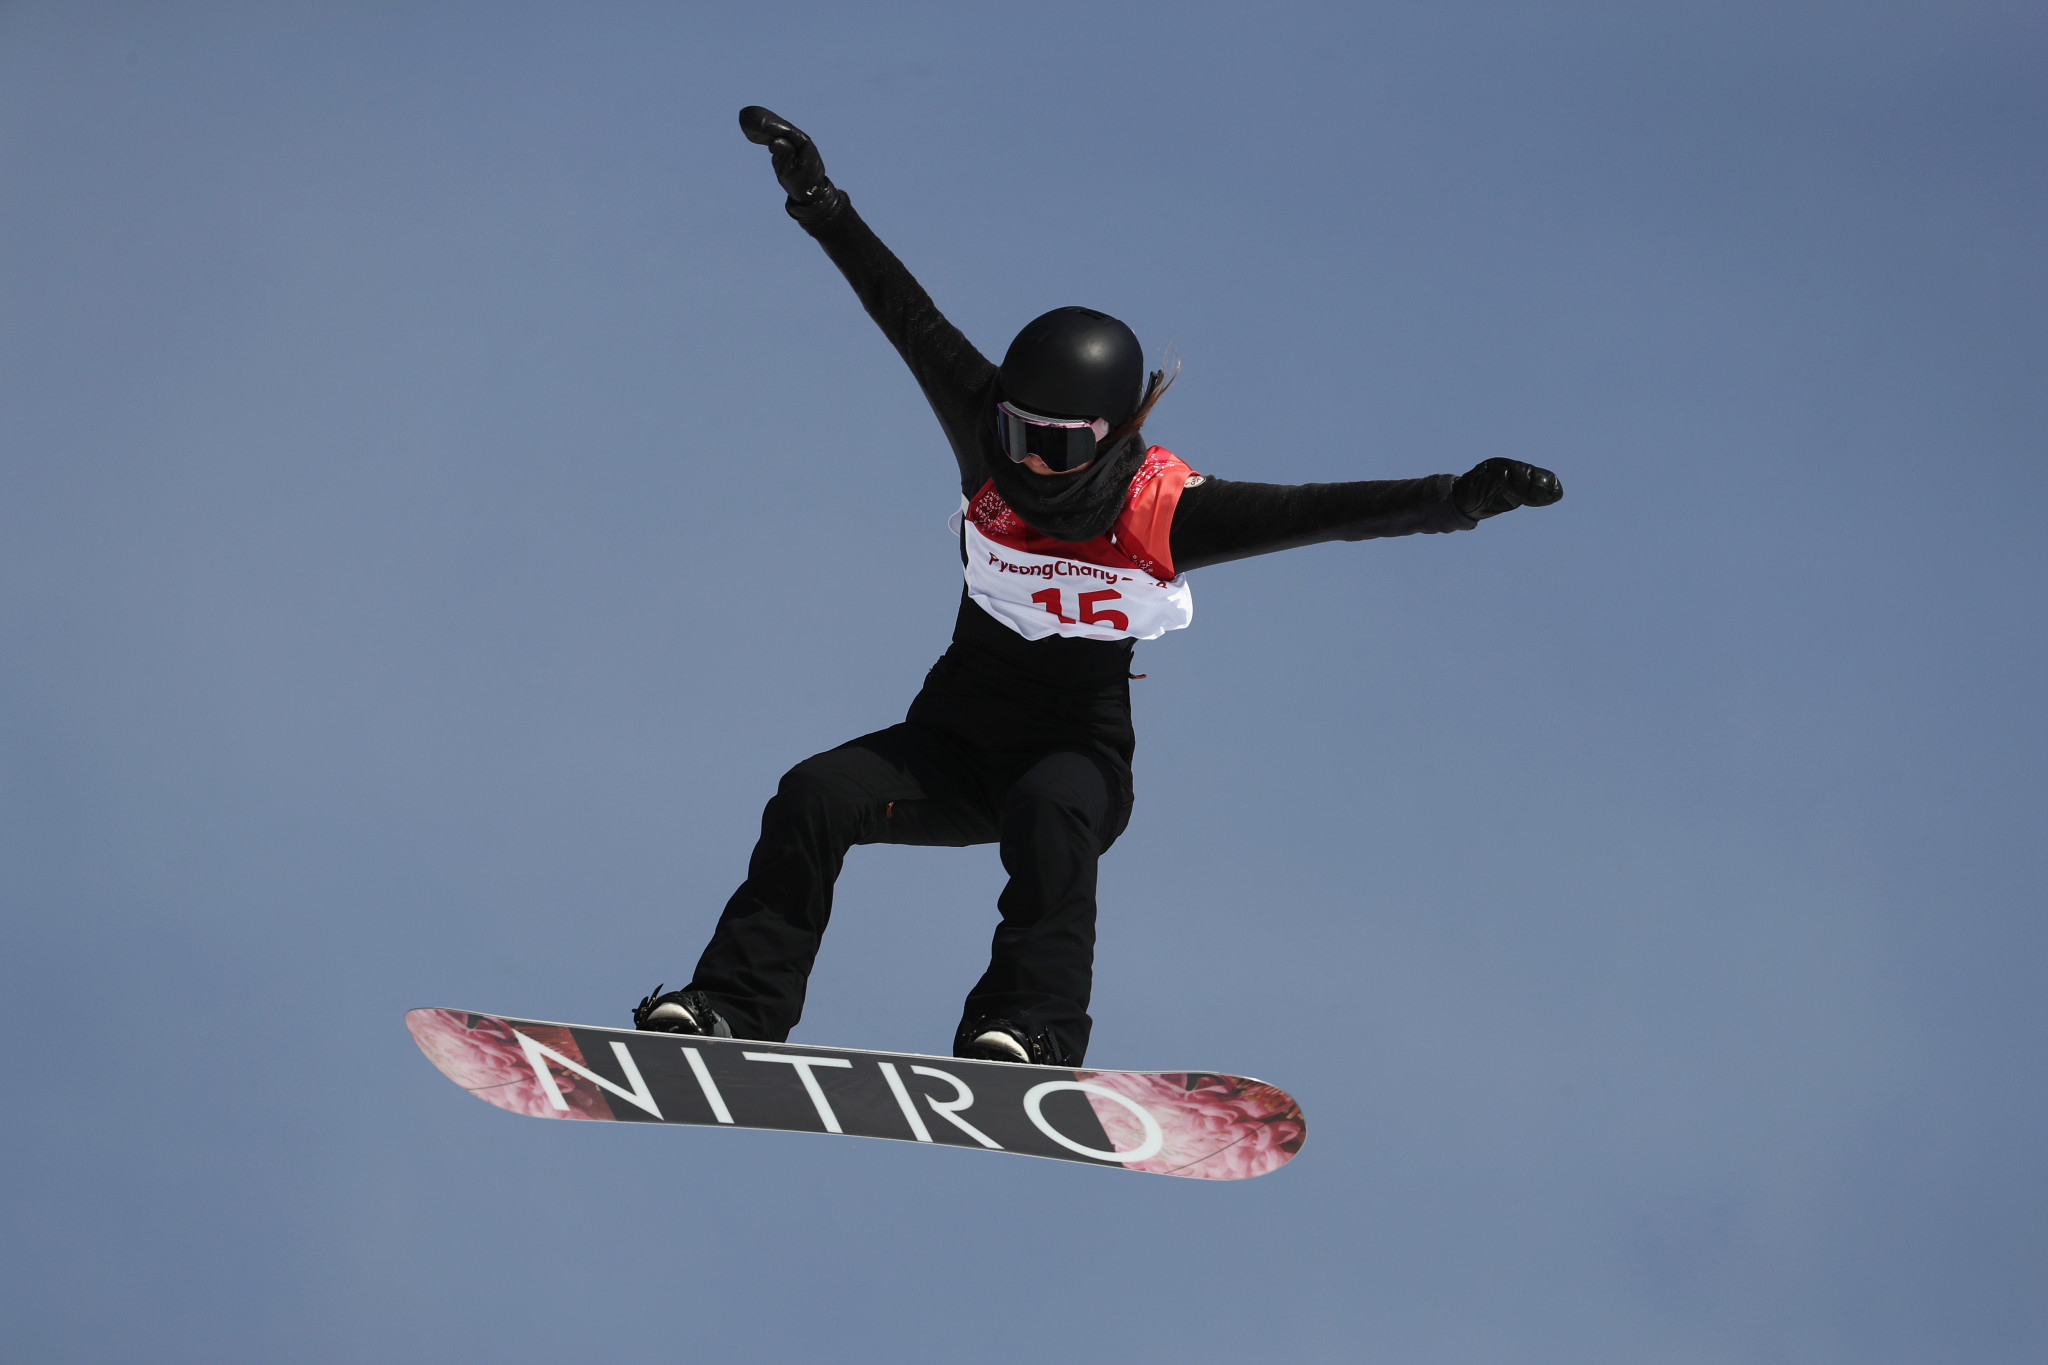 Canada's Brooke Voigt topped the women's qualifying at the FIS Snowboard World Cup event in Seiser Alm ©Getty Images